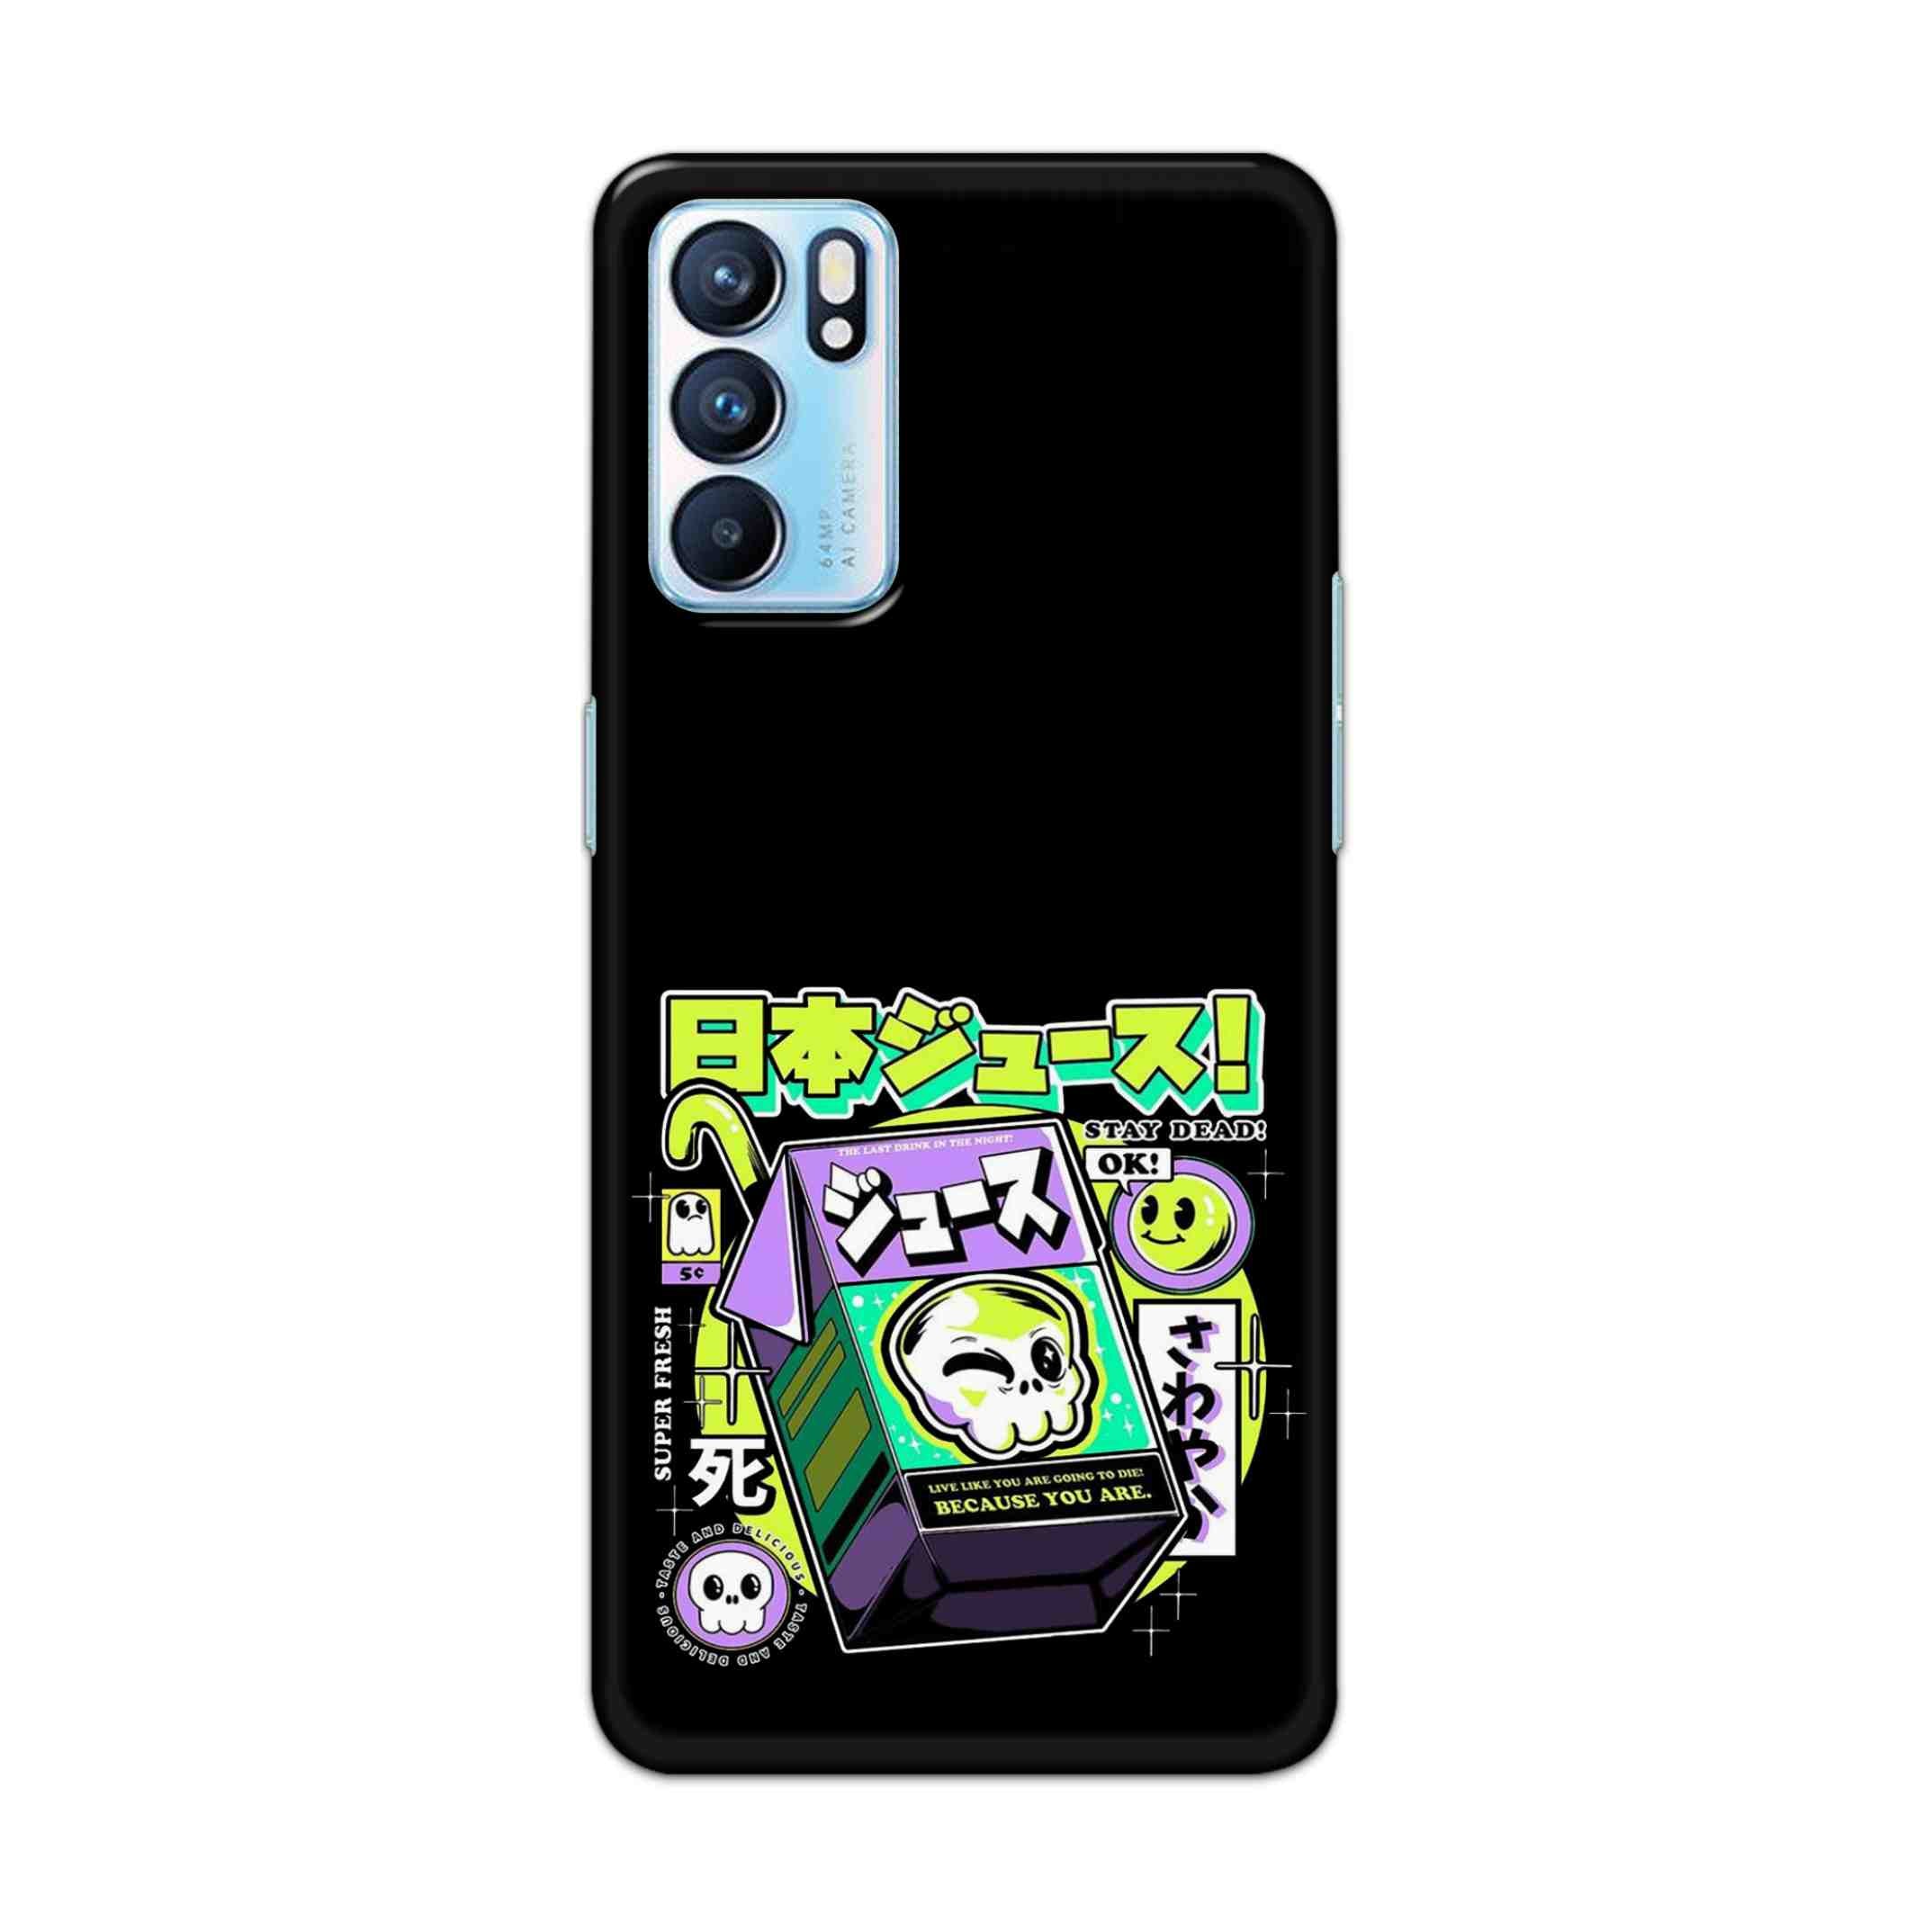 Buy Because You Are Hard Back Mobile Phone Case Cover For OPPO RENO 6 5G Online